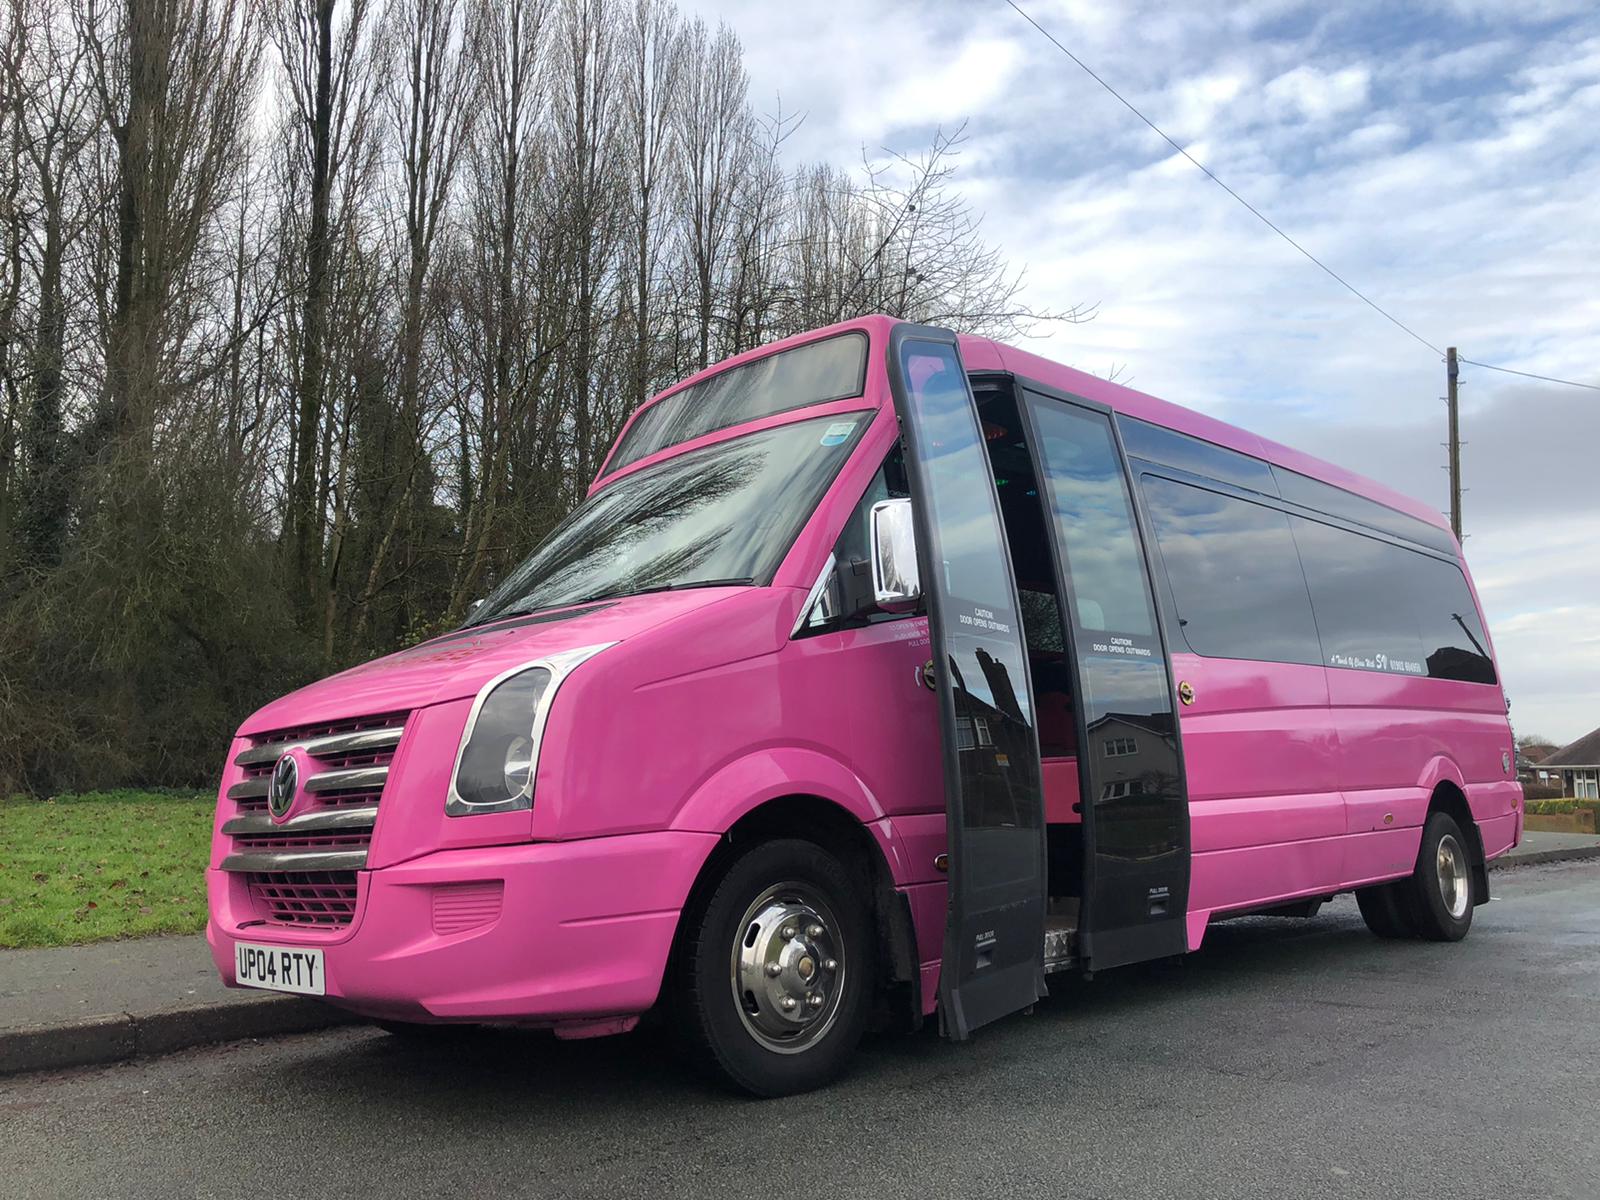 The Ultimate Guide to Planning a Memorable Hen or Stag Party on a UK Party Bus